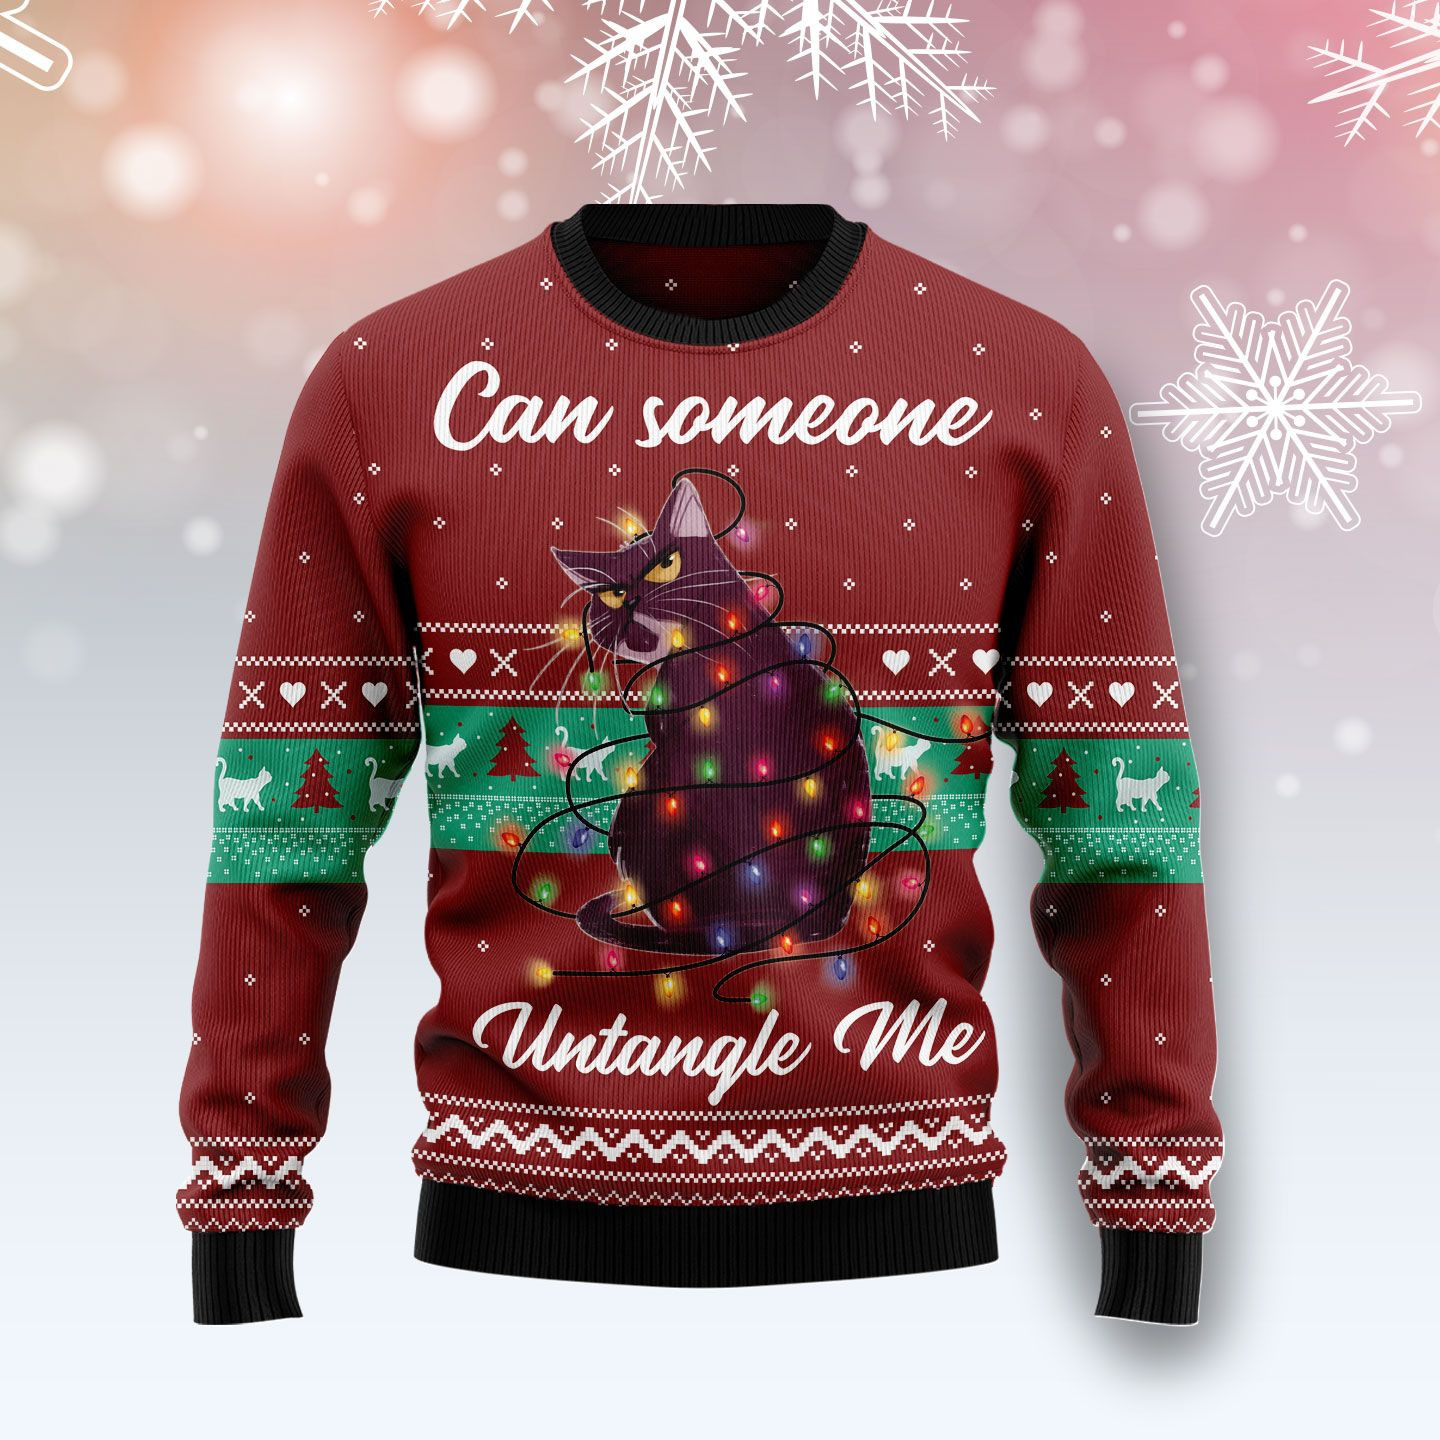 Can Someone Untangle Me Cat Ugly Christmas Sweater, Ugly Sweater For Men Women, Holiday Sweater